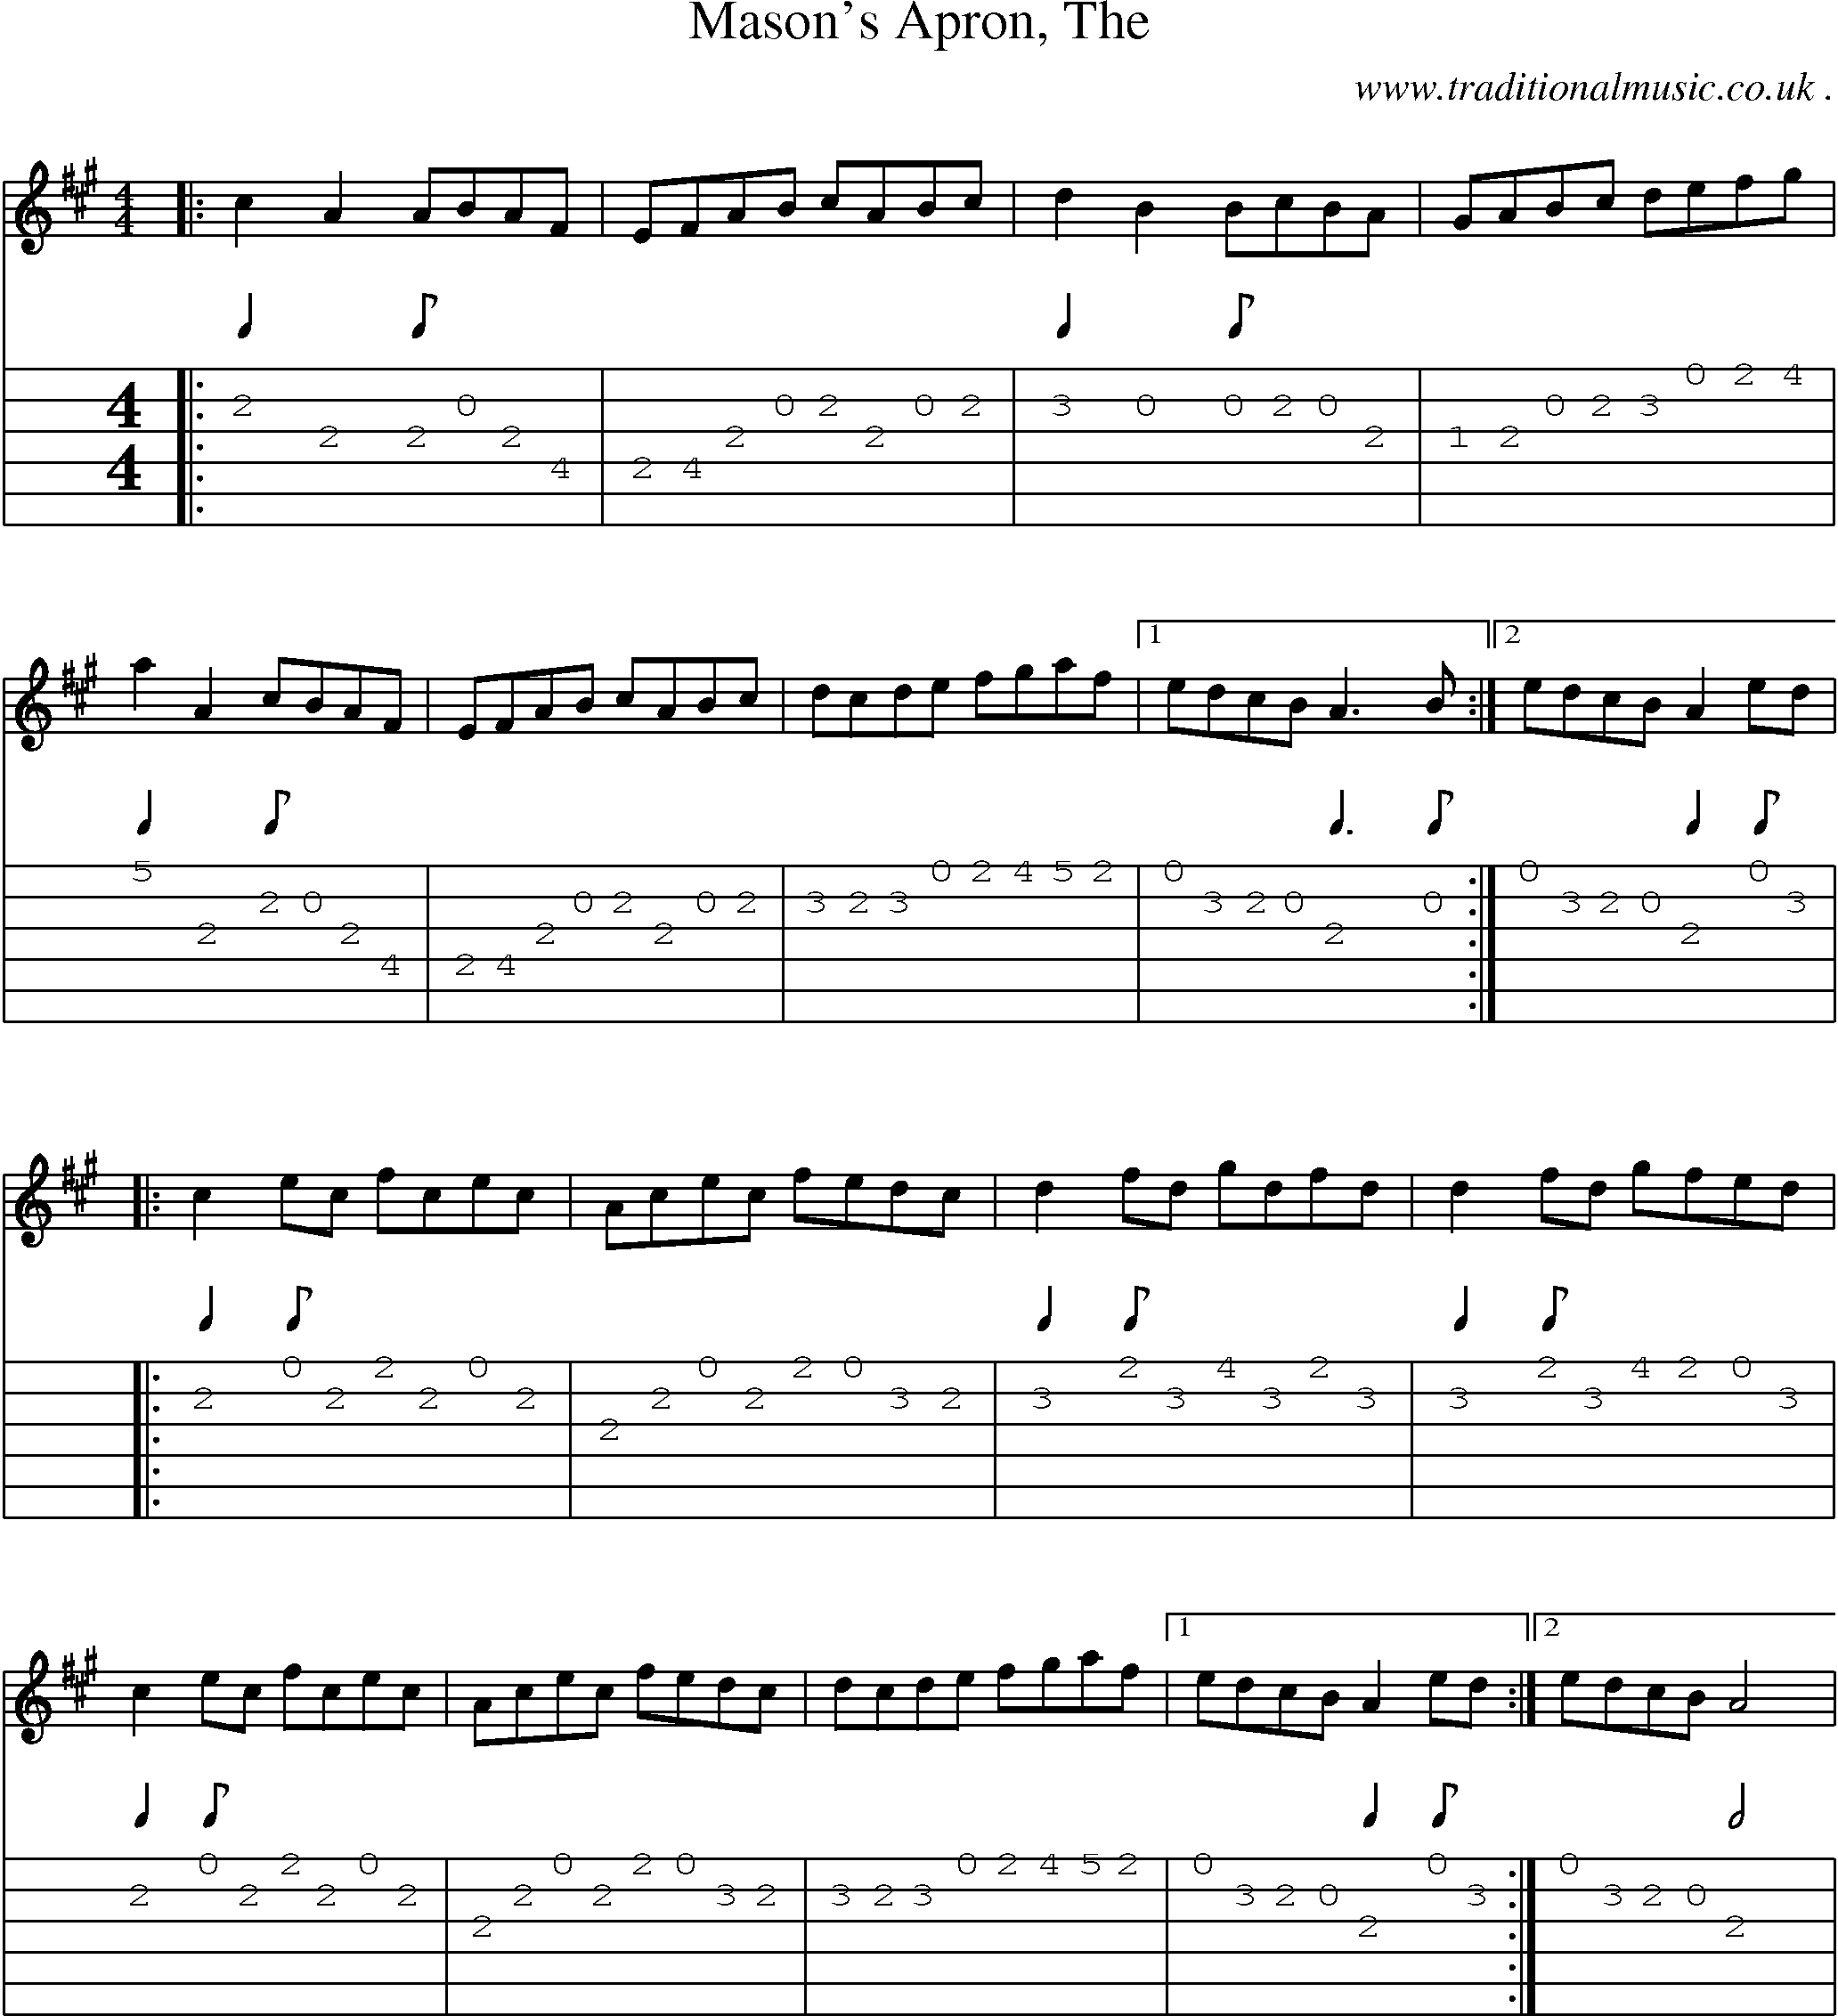 Music Score and Guitar Tabs for Masons Apron The